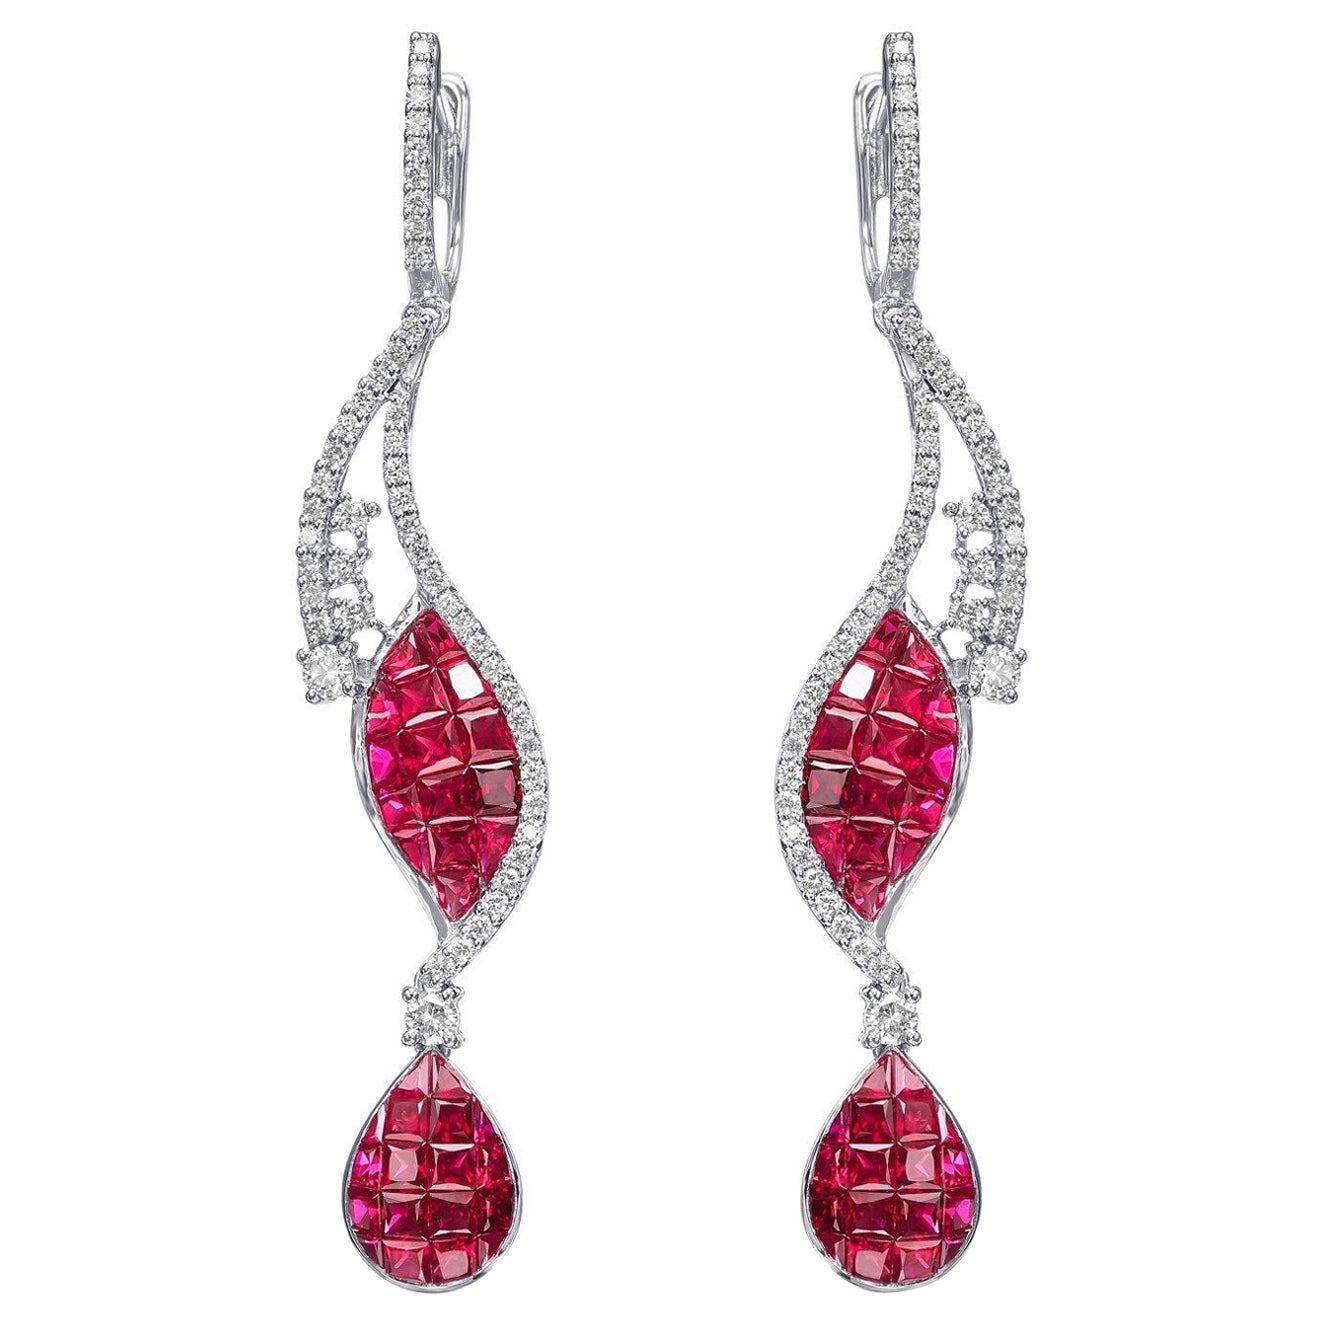 NO RESERVE!  -  5.12cttw Ruby & 0.84Ct Diamonds - 18 kt. White Gold Earrings